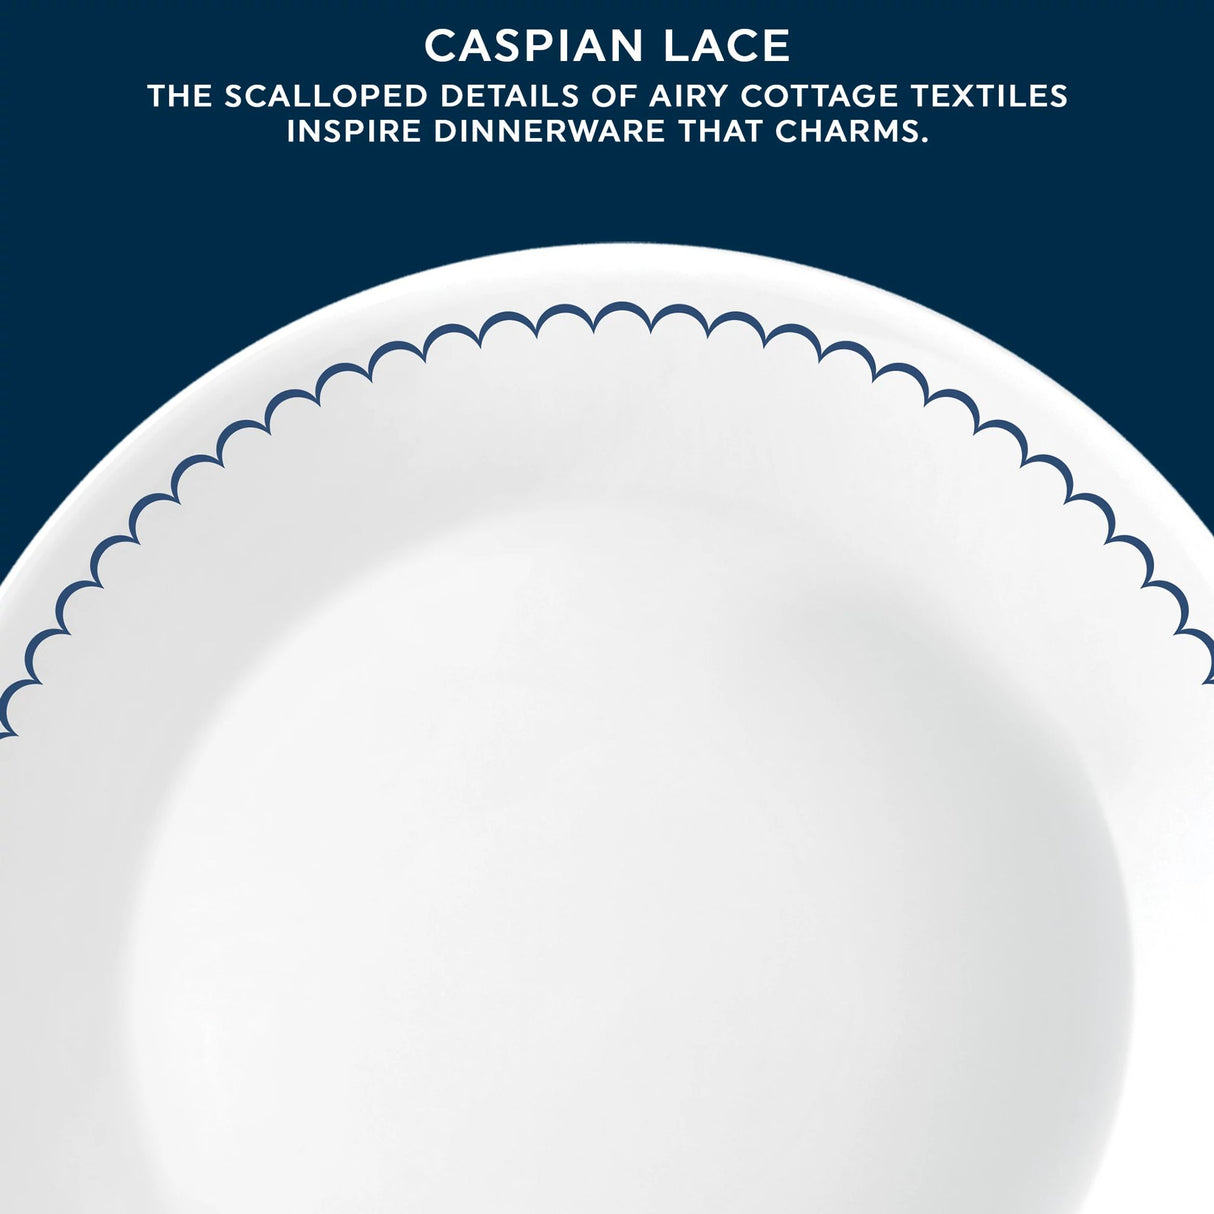  Caspian Lace Dinner Plate with text the scalloped details of airy cottage textiles inspire dinnerware that charms